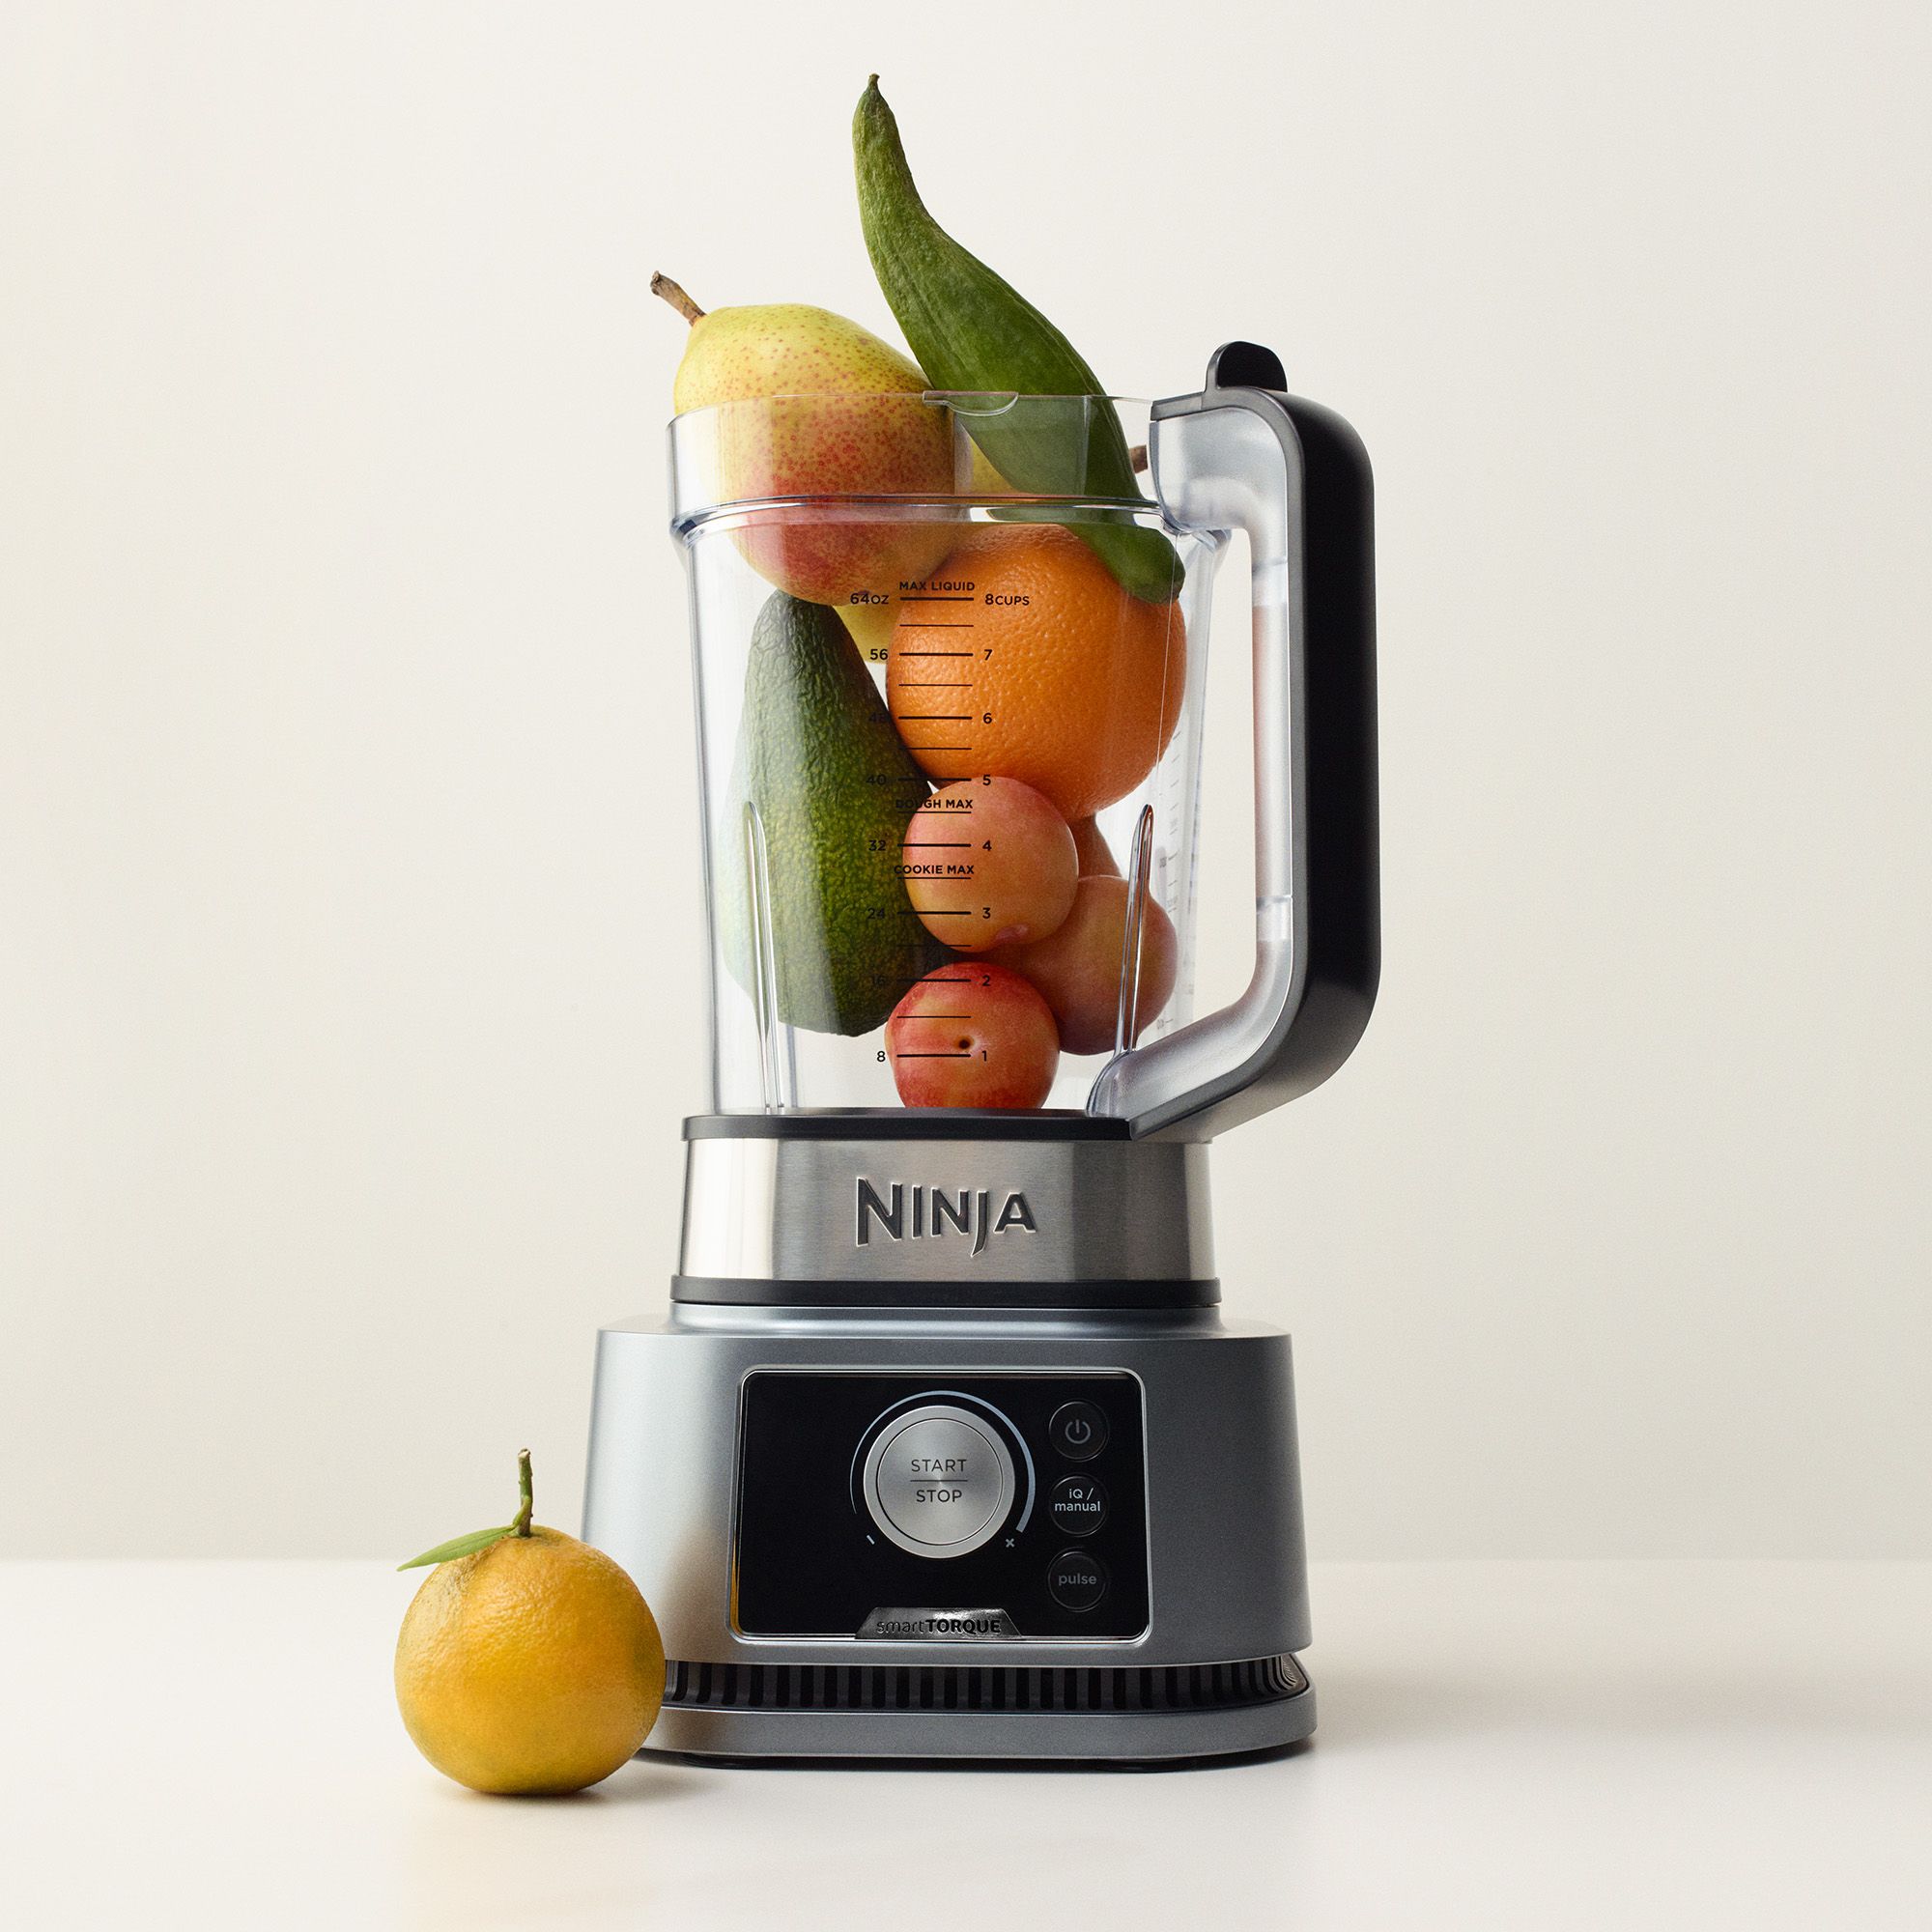 Wellbeing food processors and blenders